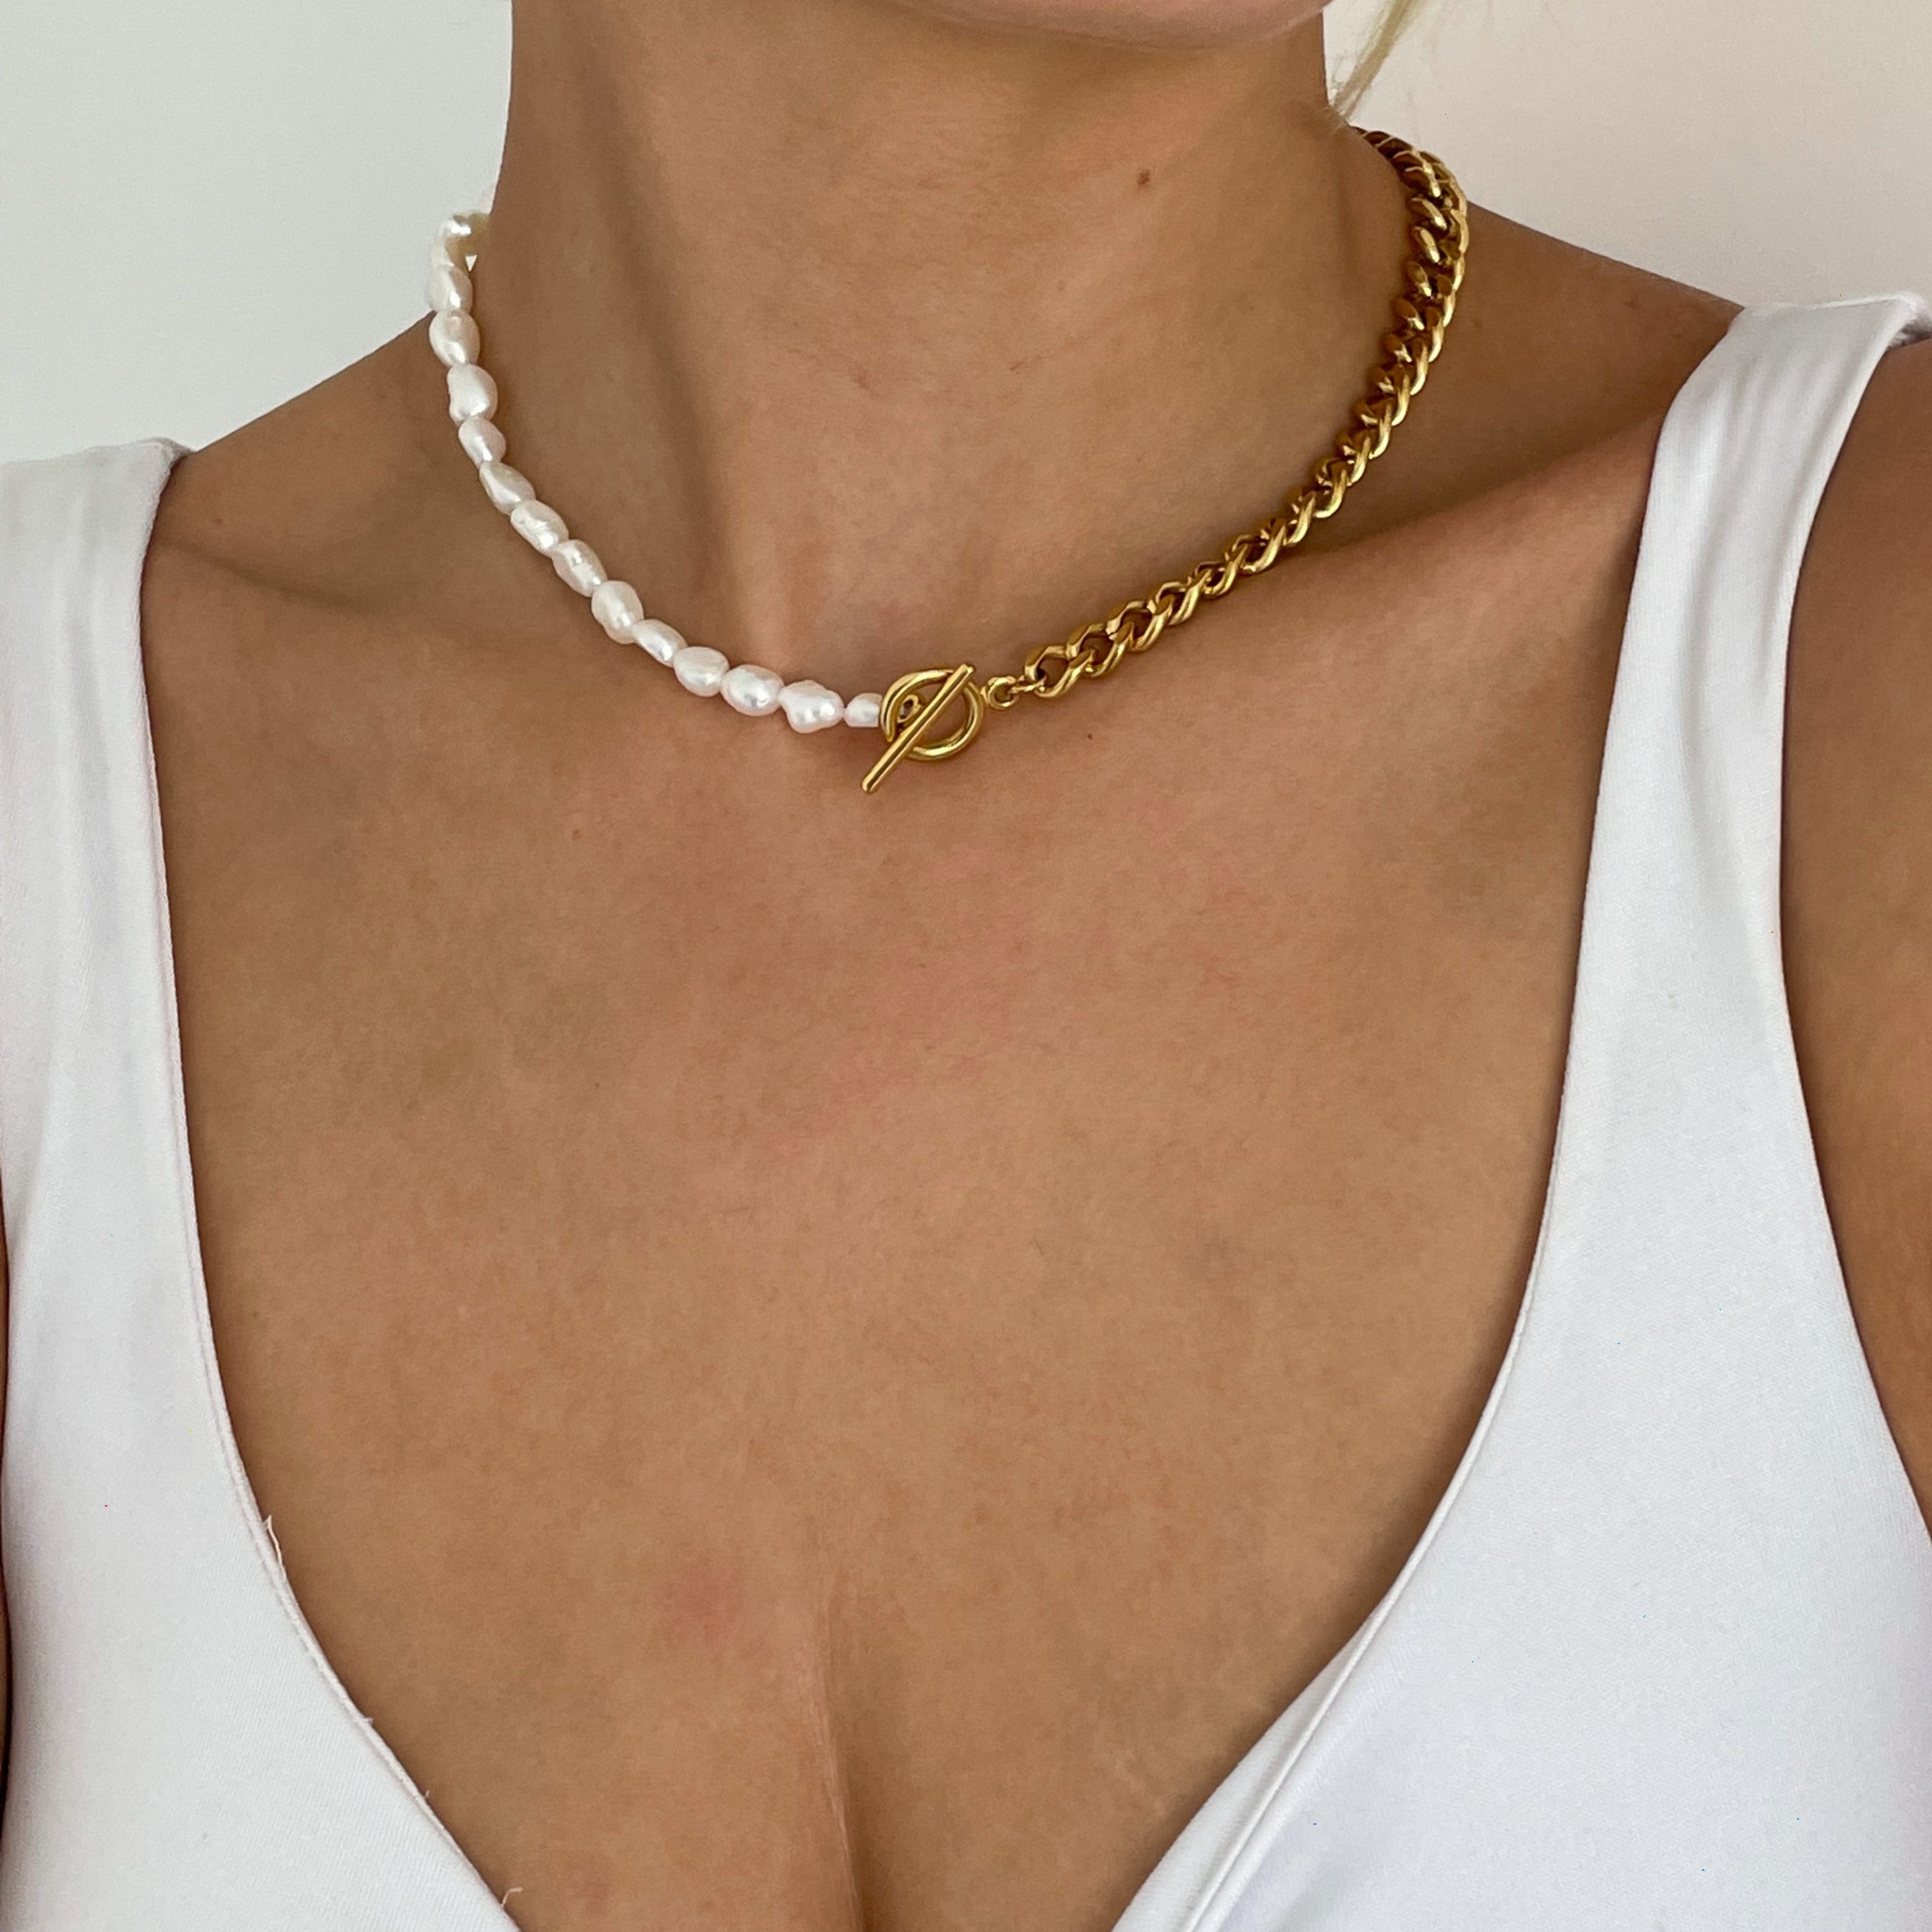 Gold and Pearl Necklace: A versatile addition to your jewellery collection